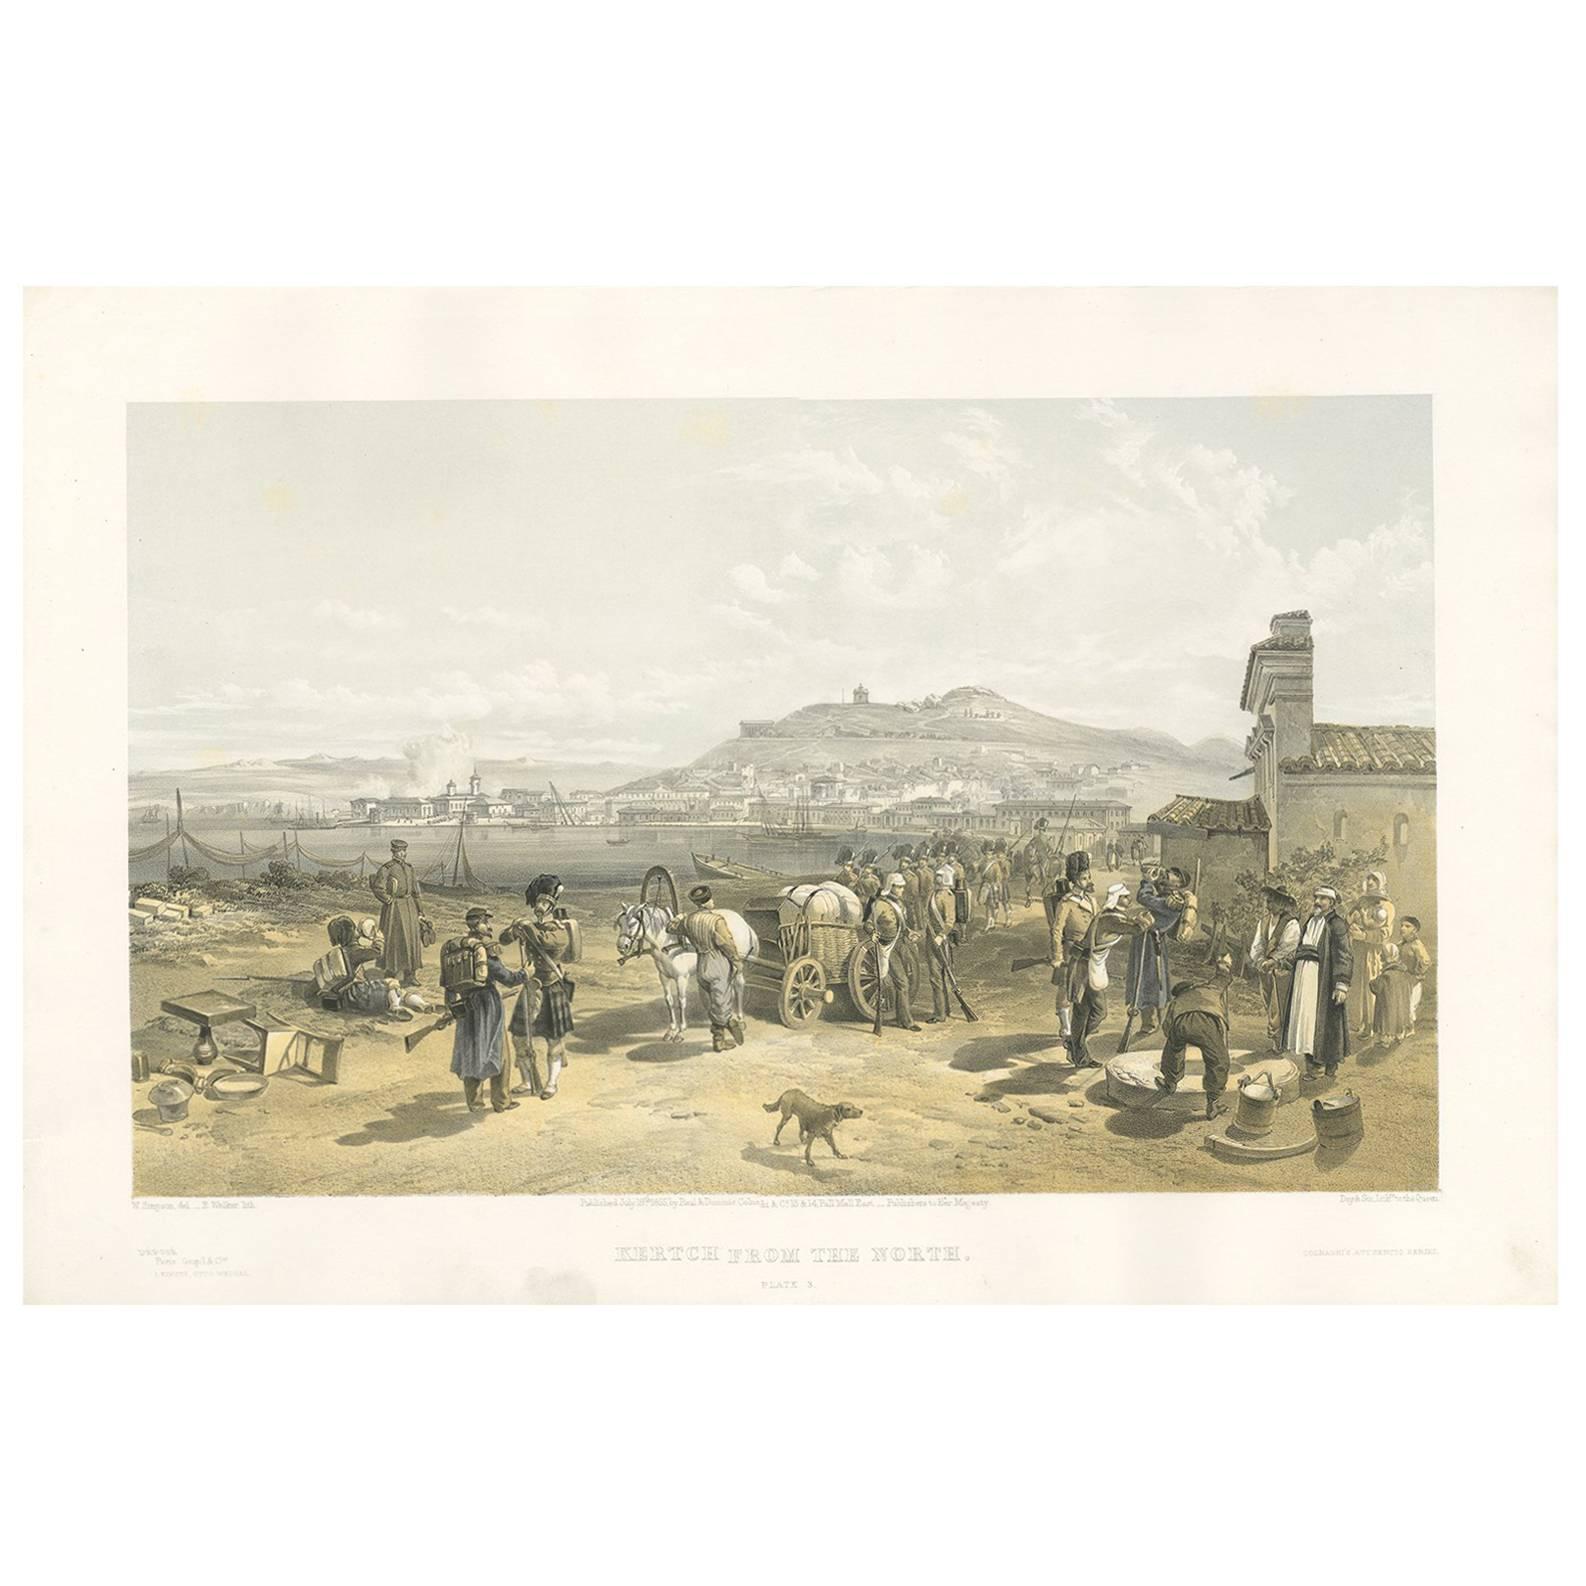 Antique Print with a View of Kertch ‘Crimean War’ by W. Simpson, 1855